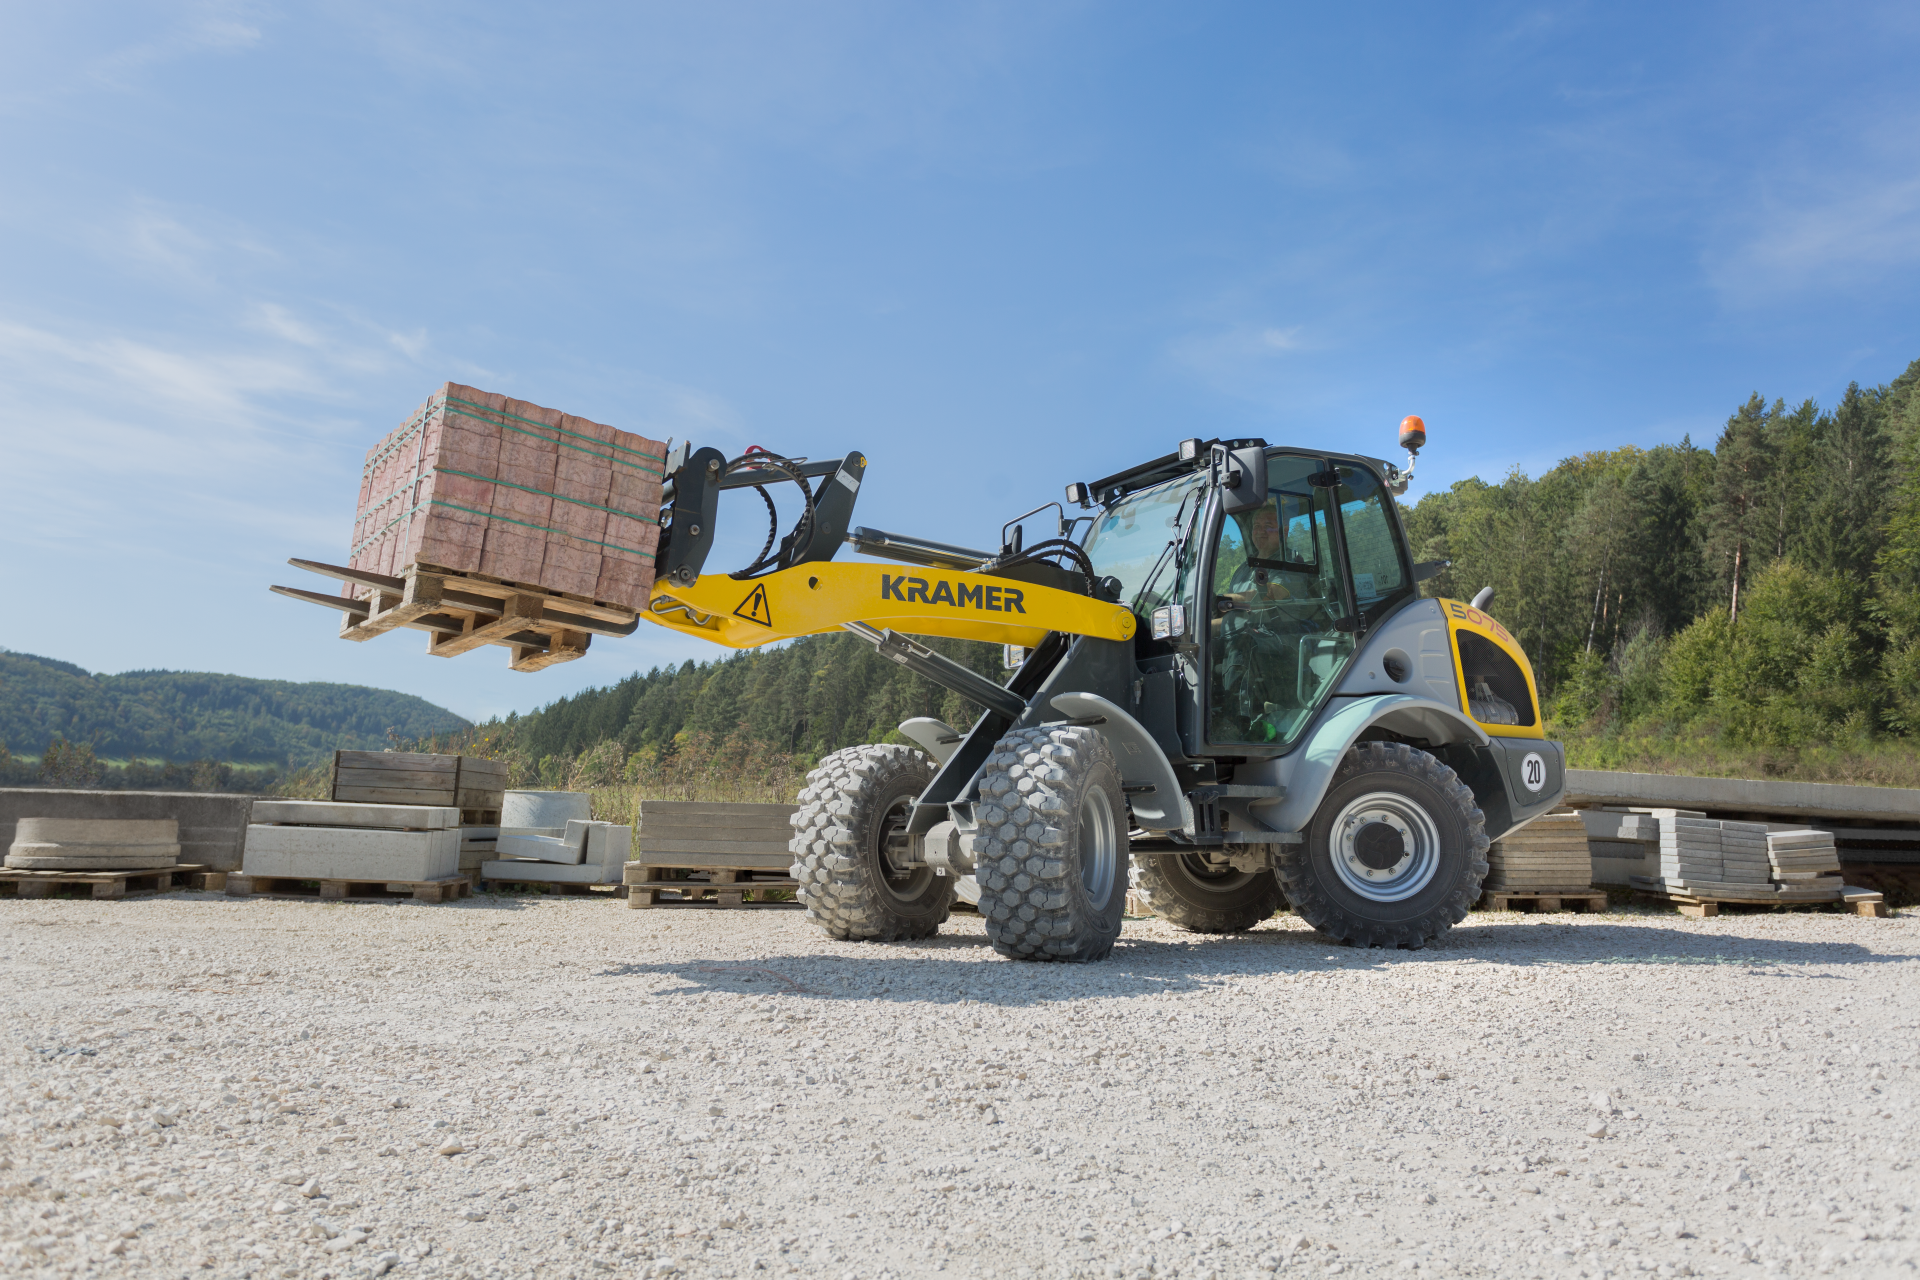 The Kramer wheel loader 5075 while transporting a stone pallet.